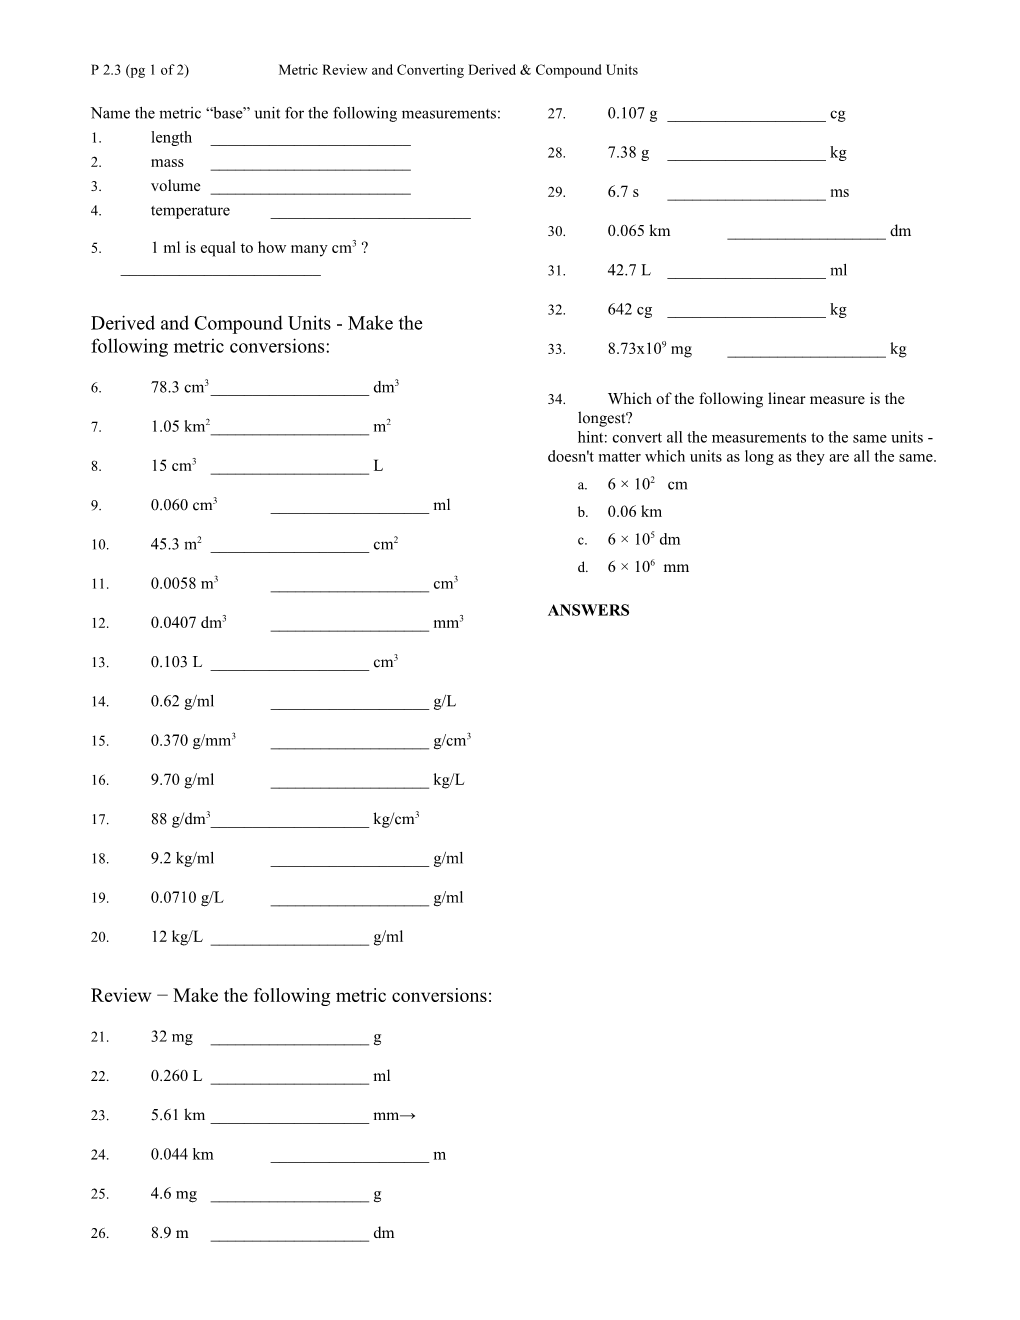 P 2.3 (Pg 1 of 2) Metric Review and Converting Derived & Compound Units